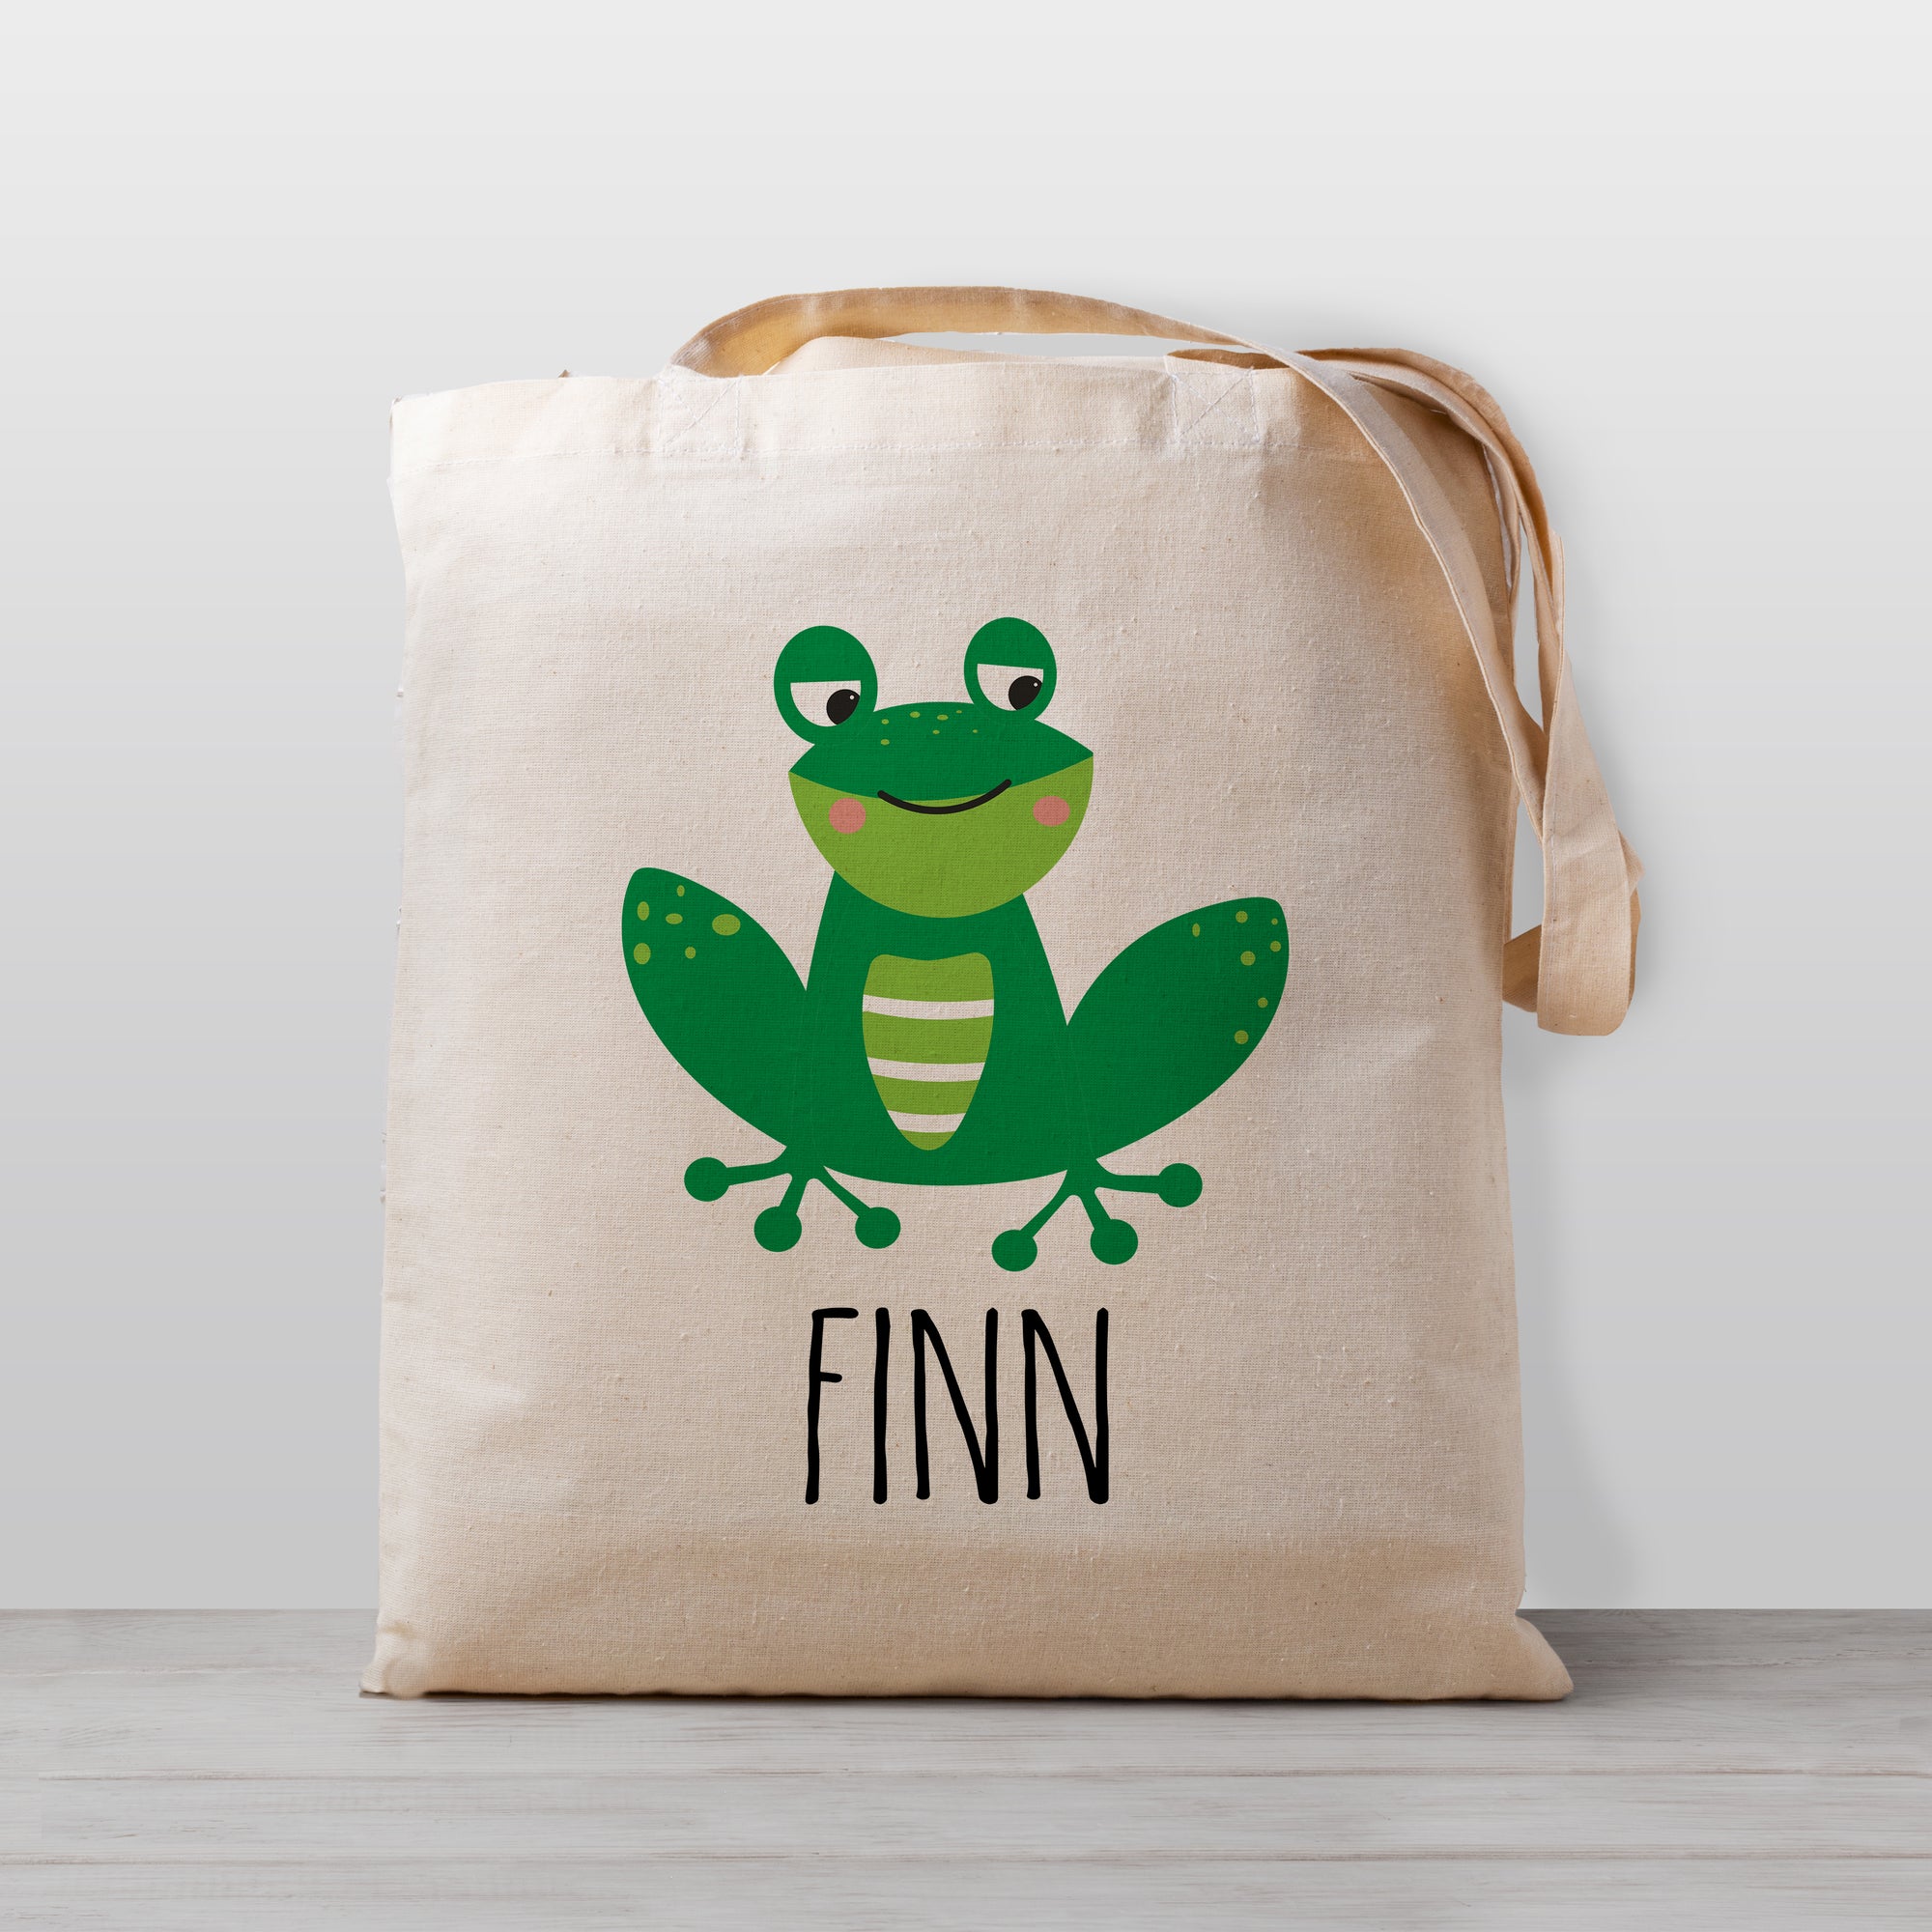 A cute personalized frog tote bag, perfect for carrying your little's stuff to daycare, preschool, or to use as a library book bag. Gender neutral so it's perfect for a boy or girl.